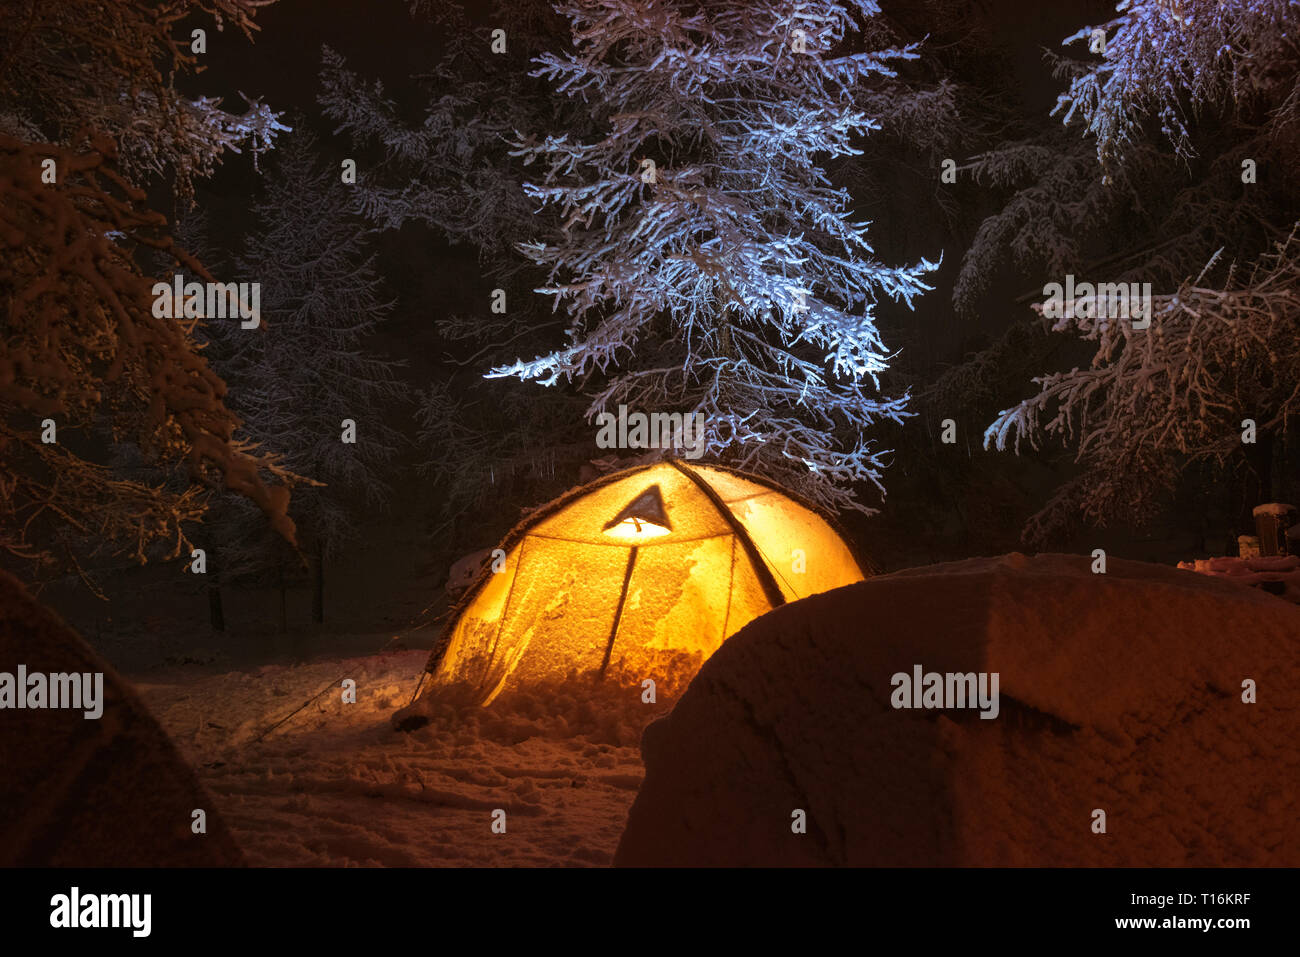 Night winter camp with group of tents in snow capped forest Stock Photo